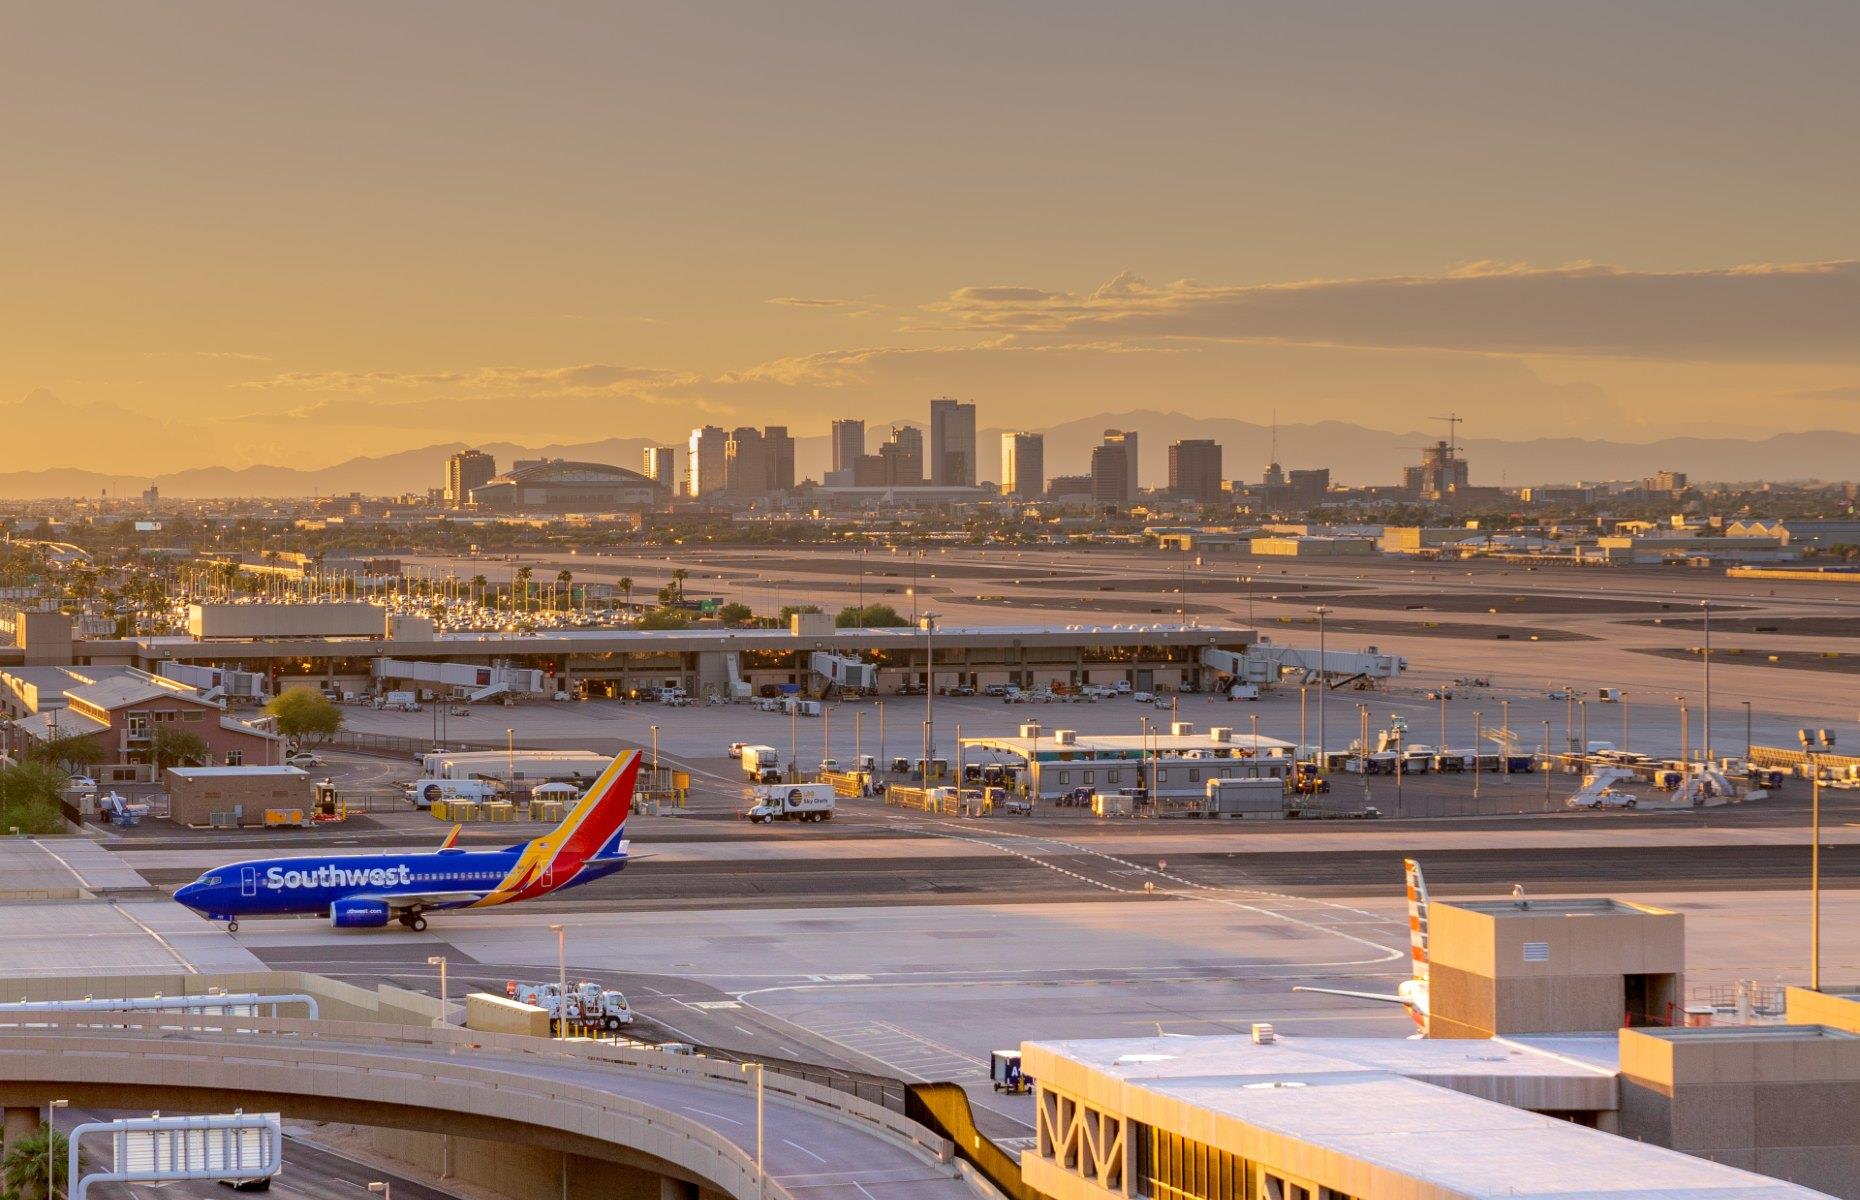 <p>Conveniently located just three miles (5km) from downtown Phoenix, <a href="https://www.skyharbor.com/">this traveler favorite</a> was ranked as the fifth-best Mega Airport in North America by J.D. Power’s <a href="https://www.jdpower.com/business/press-releases/2021-north-america-airport-satisfaction-study">annual satisfaction study</a>. One of the largest and busiest airports in the country, it typically handles 1,200 aircraft and 125,000 passengers every day. Thanks to a modernization project completed in 2020, Terminal 3 has been equipped with extra ticket counters, baggage processing facilities and an improved security system, making things even more streamlined.</p>